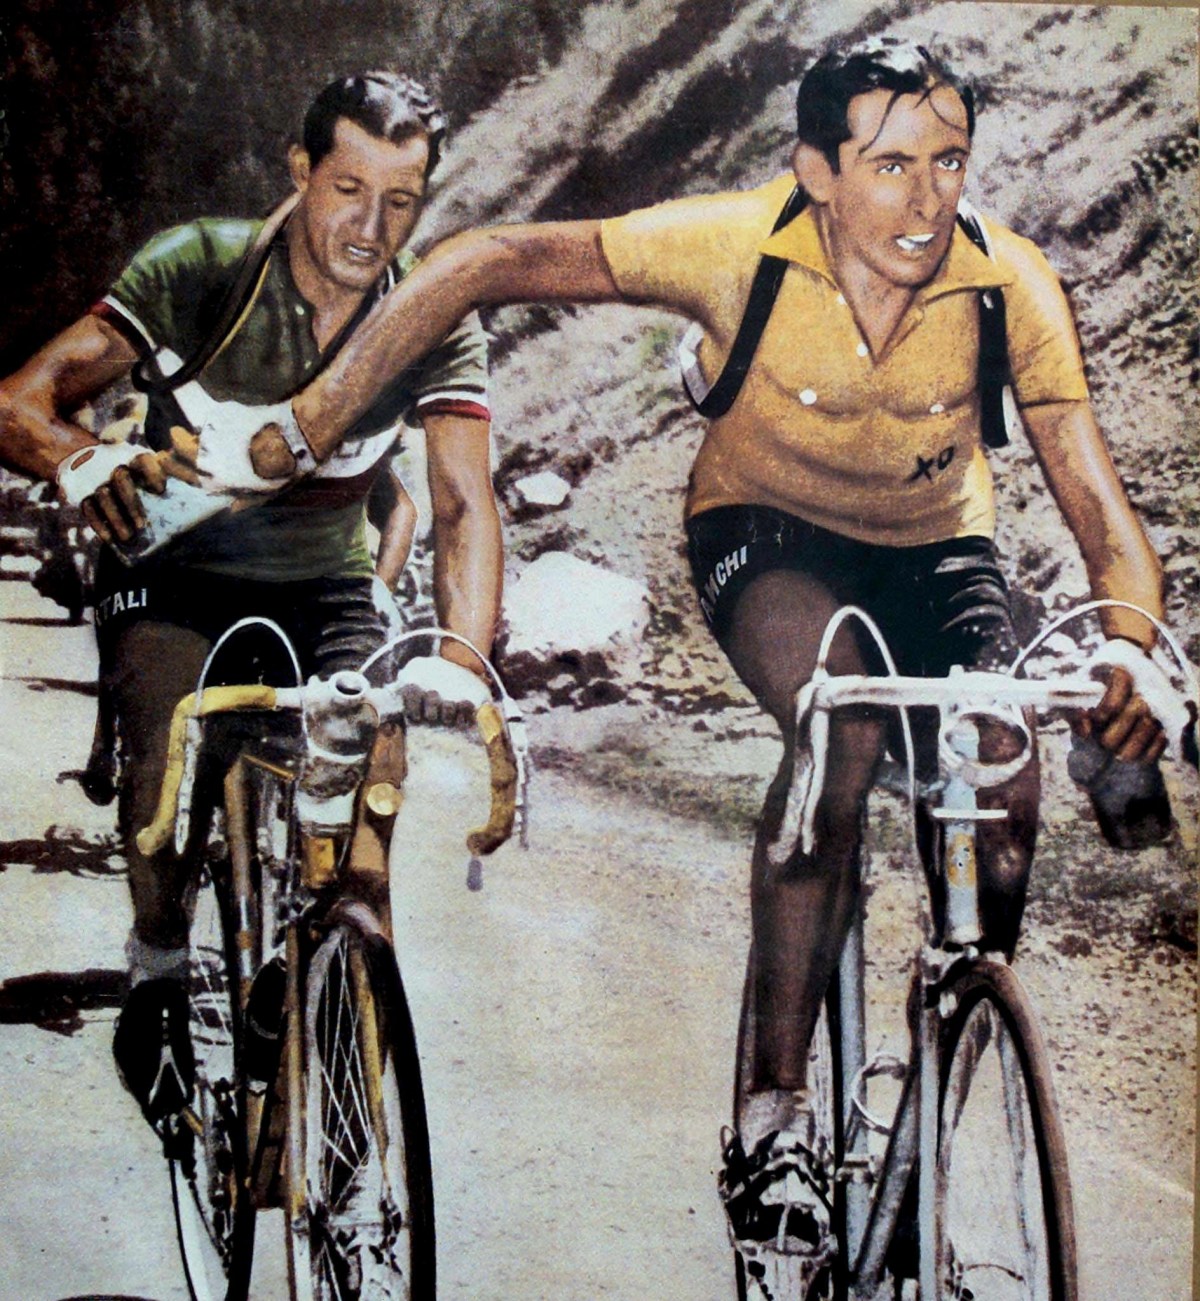 The famous photograph showing the passing-over of a water bottle between Italian cyclists Gino Bartali (L) and Fausto Coppi, who were rivals, during a stage of the Tour de France of 1949. Photo: AAP/EPA/ANSA